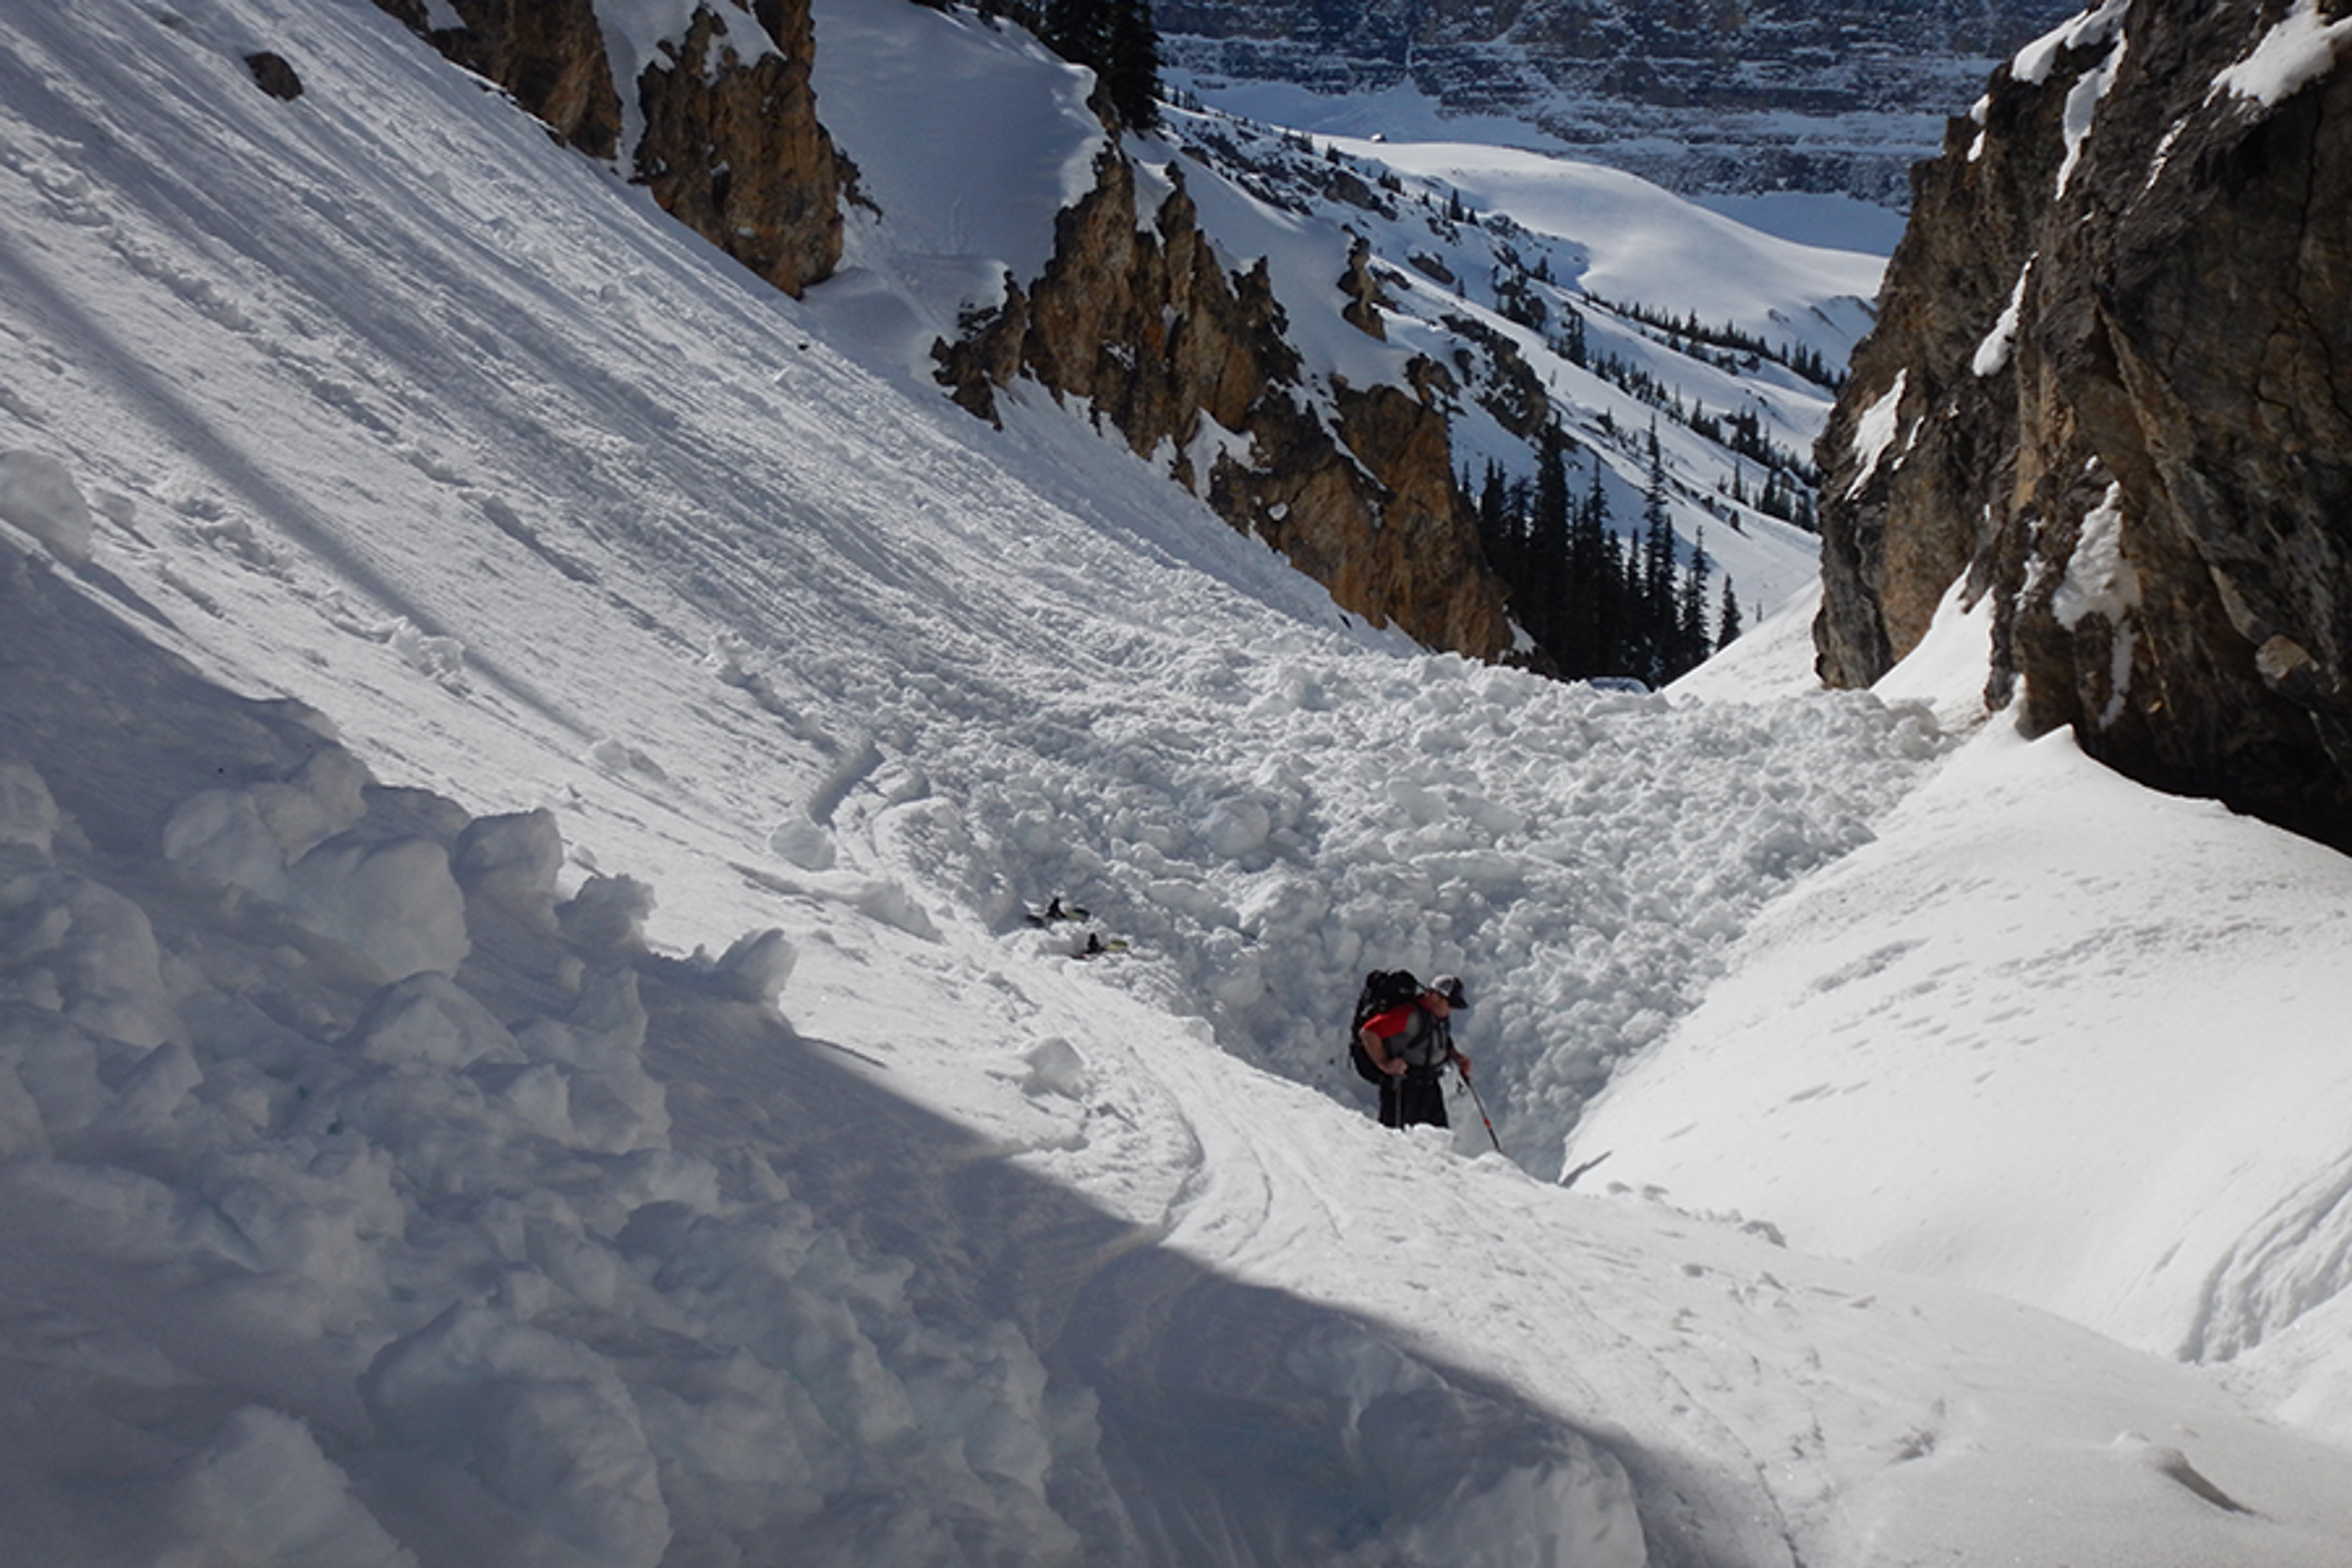 This is a classic terrain trap, where an avalanche from above piled up deeply in the gully. It would have resulted in a full burial for anyone caught in its path.